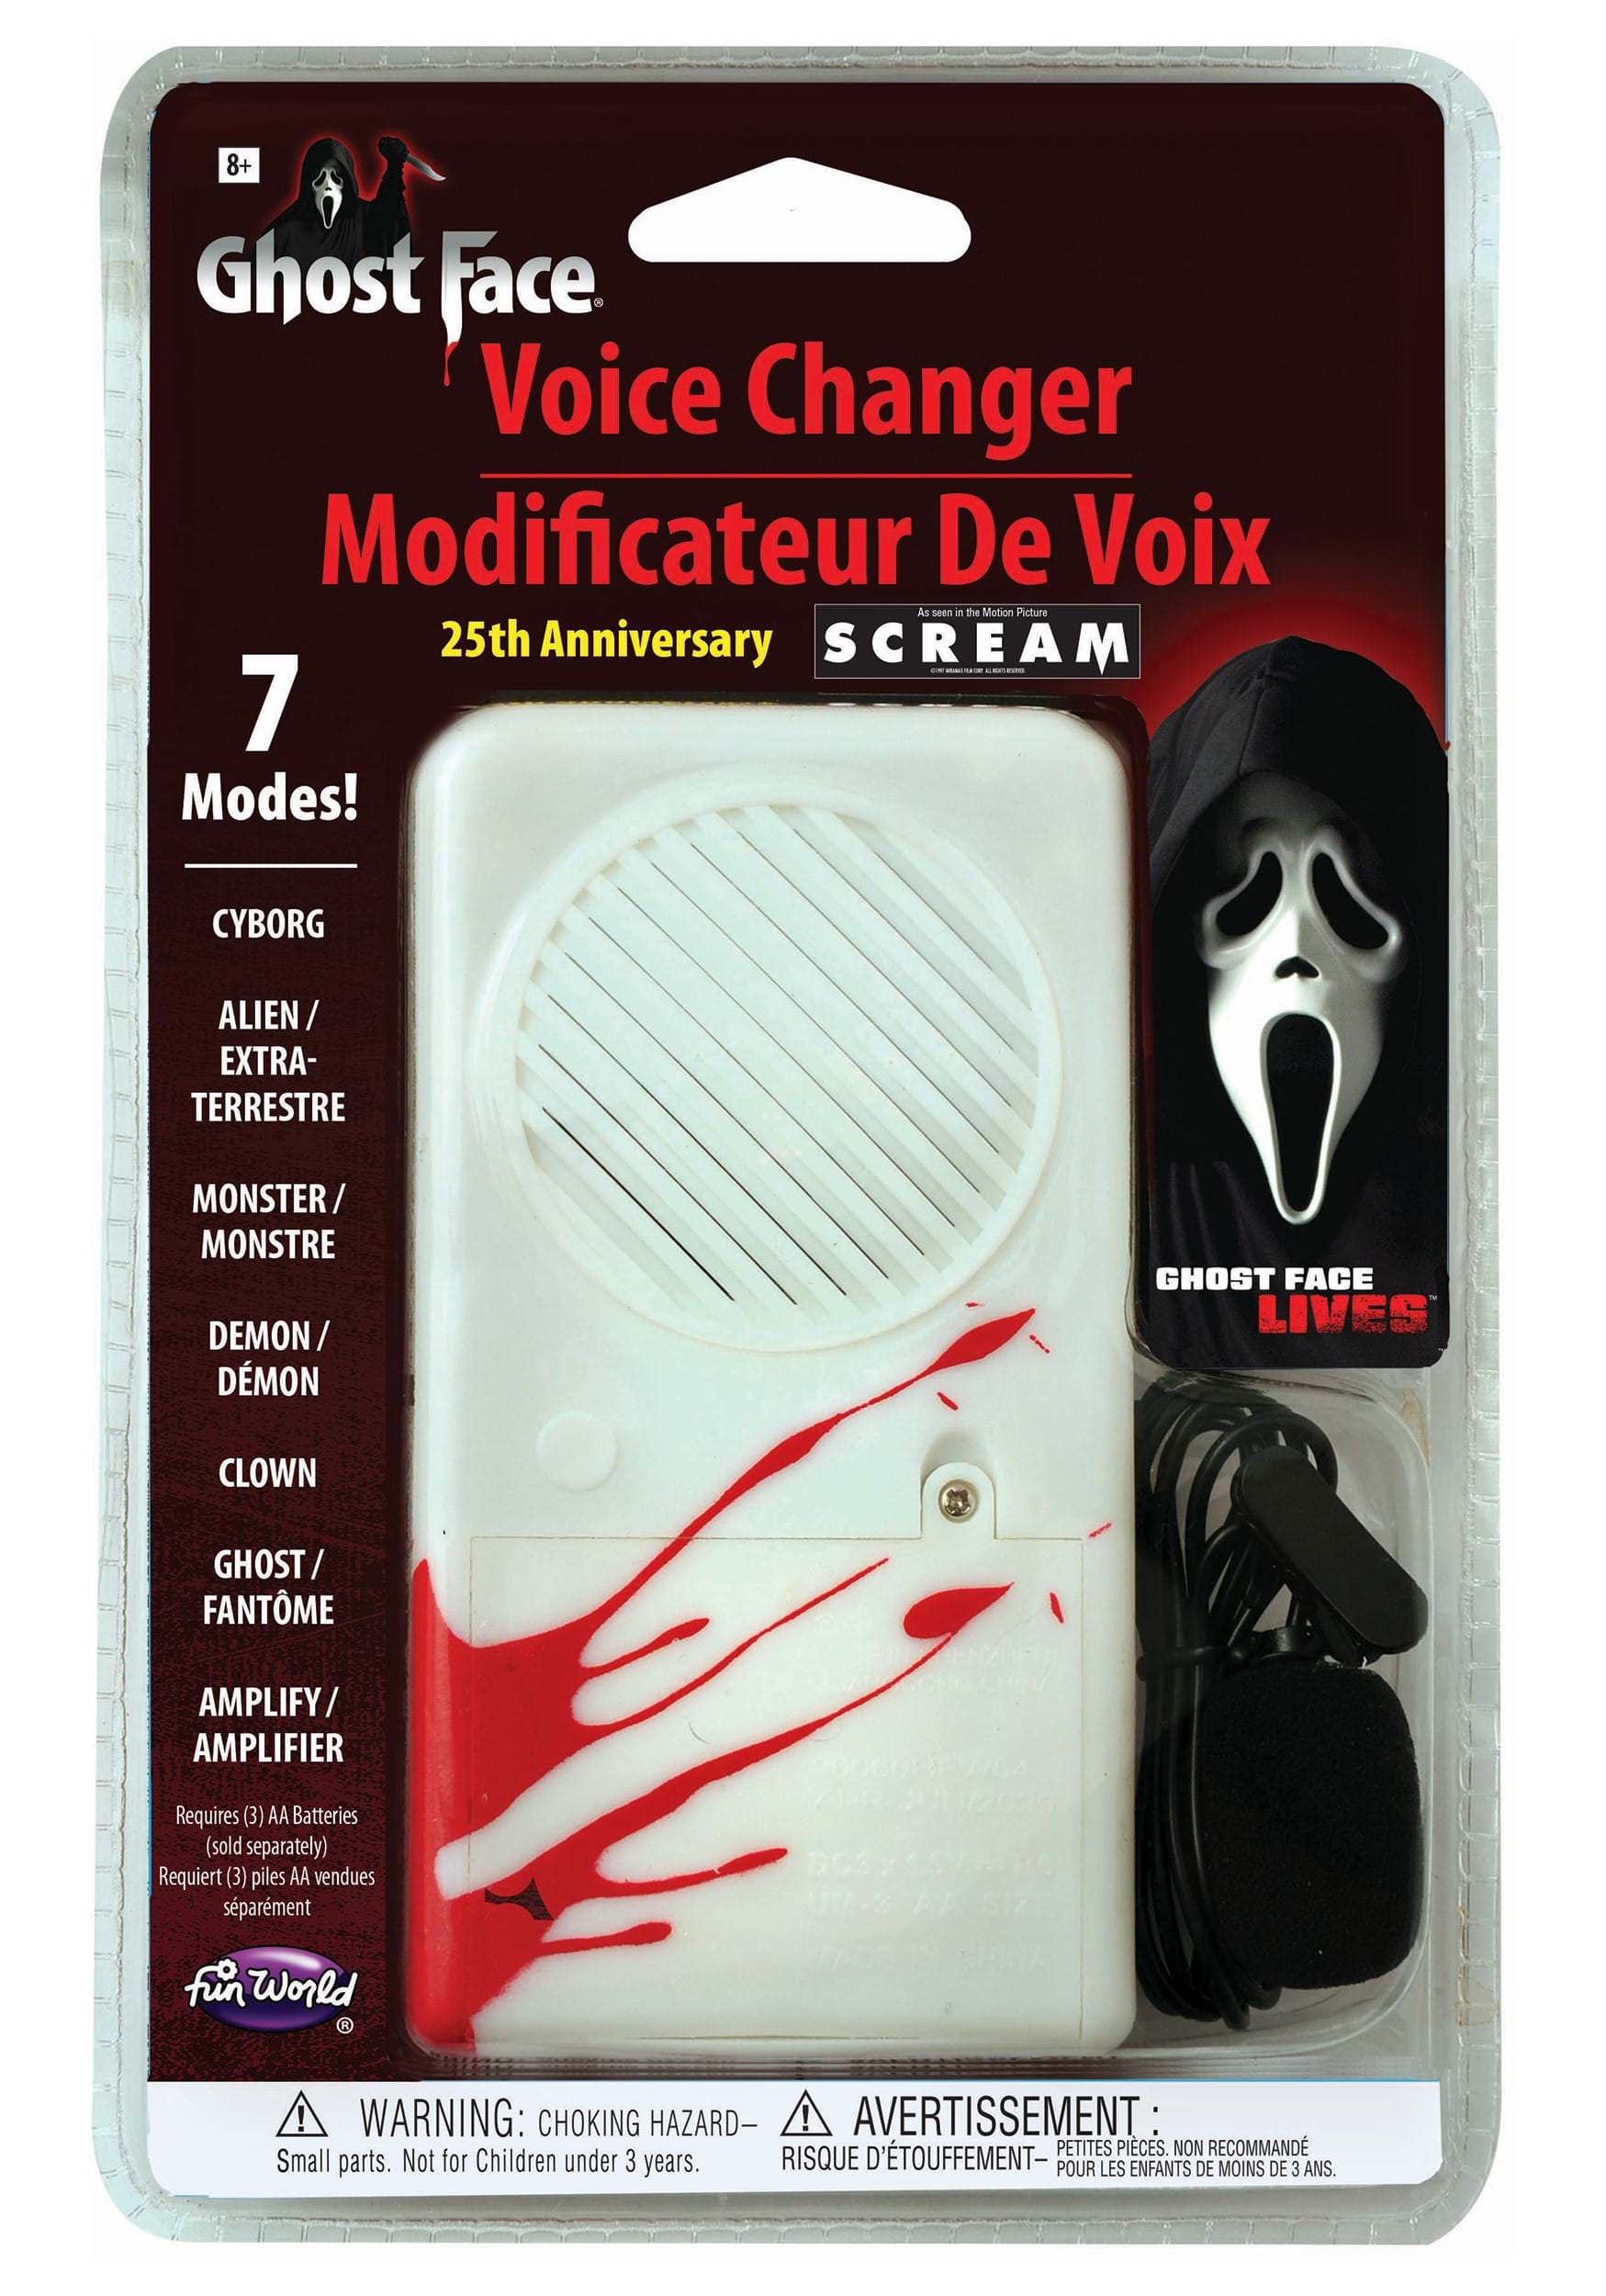 Ghost Face 25th Anniversary Deluxe Voice Changer